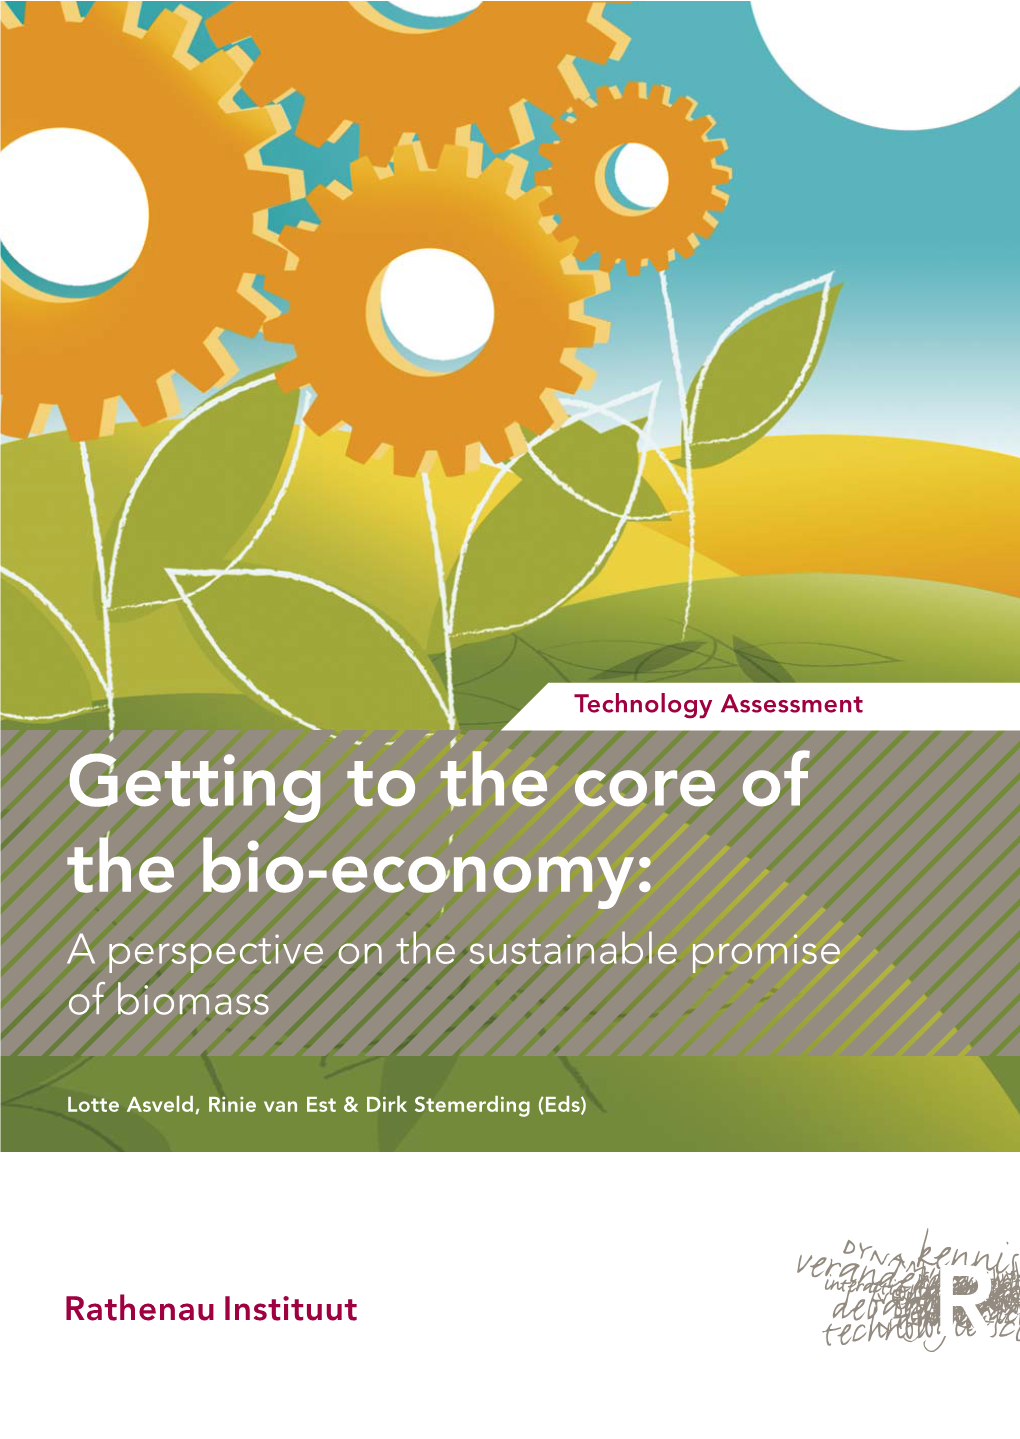 Getting to the Core of the Bio-Economy: a Perspective on the Sustainable Promise of Biomass